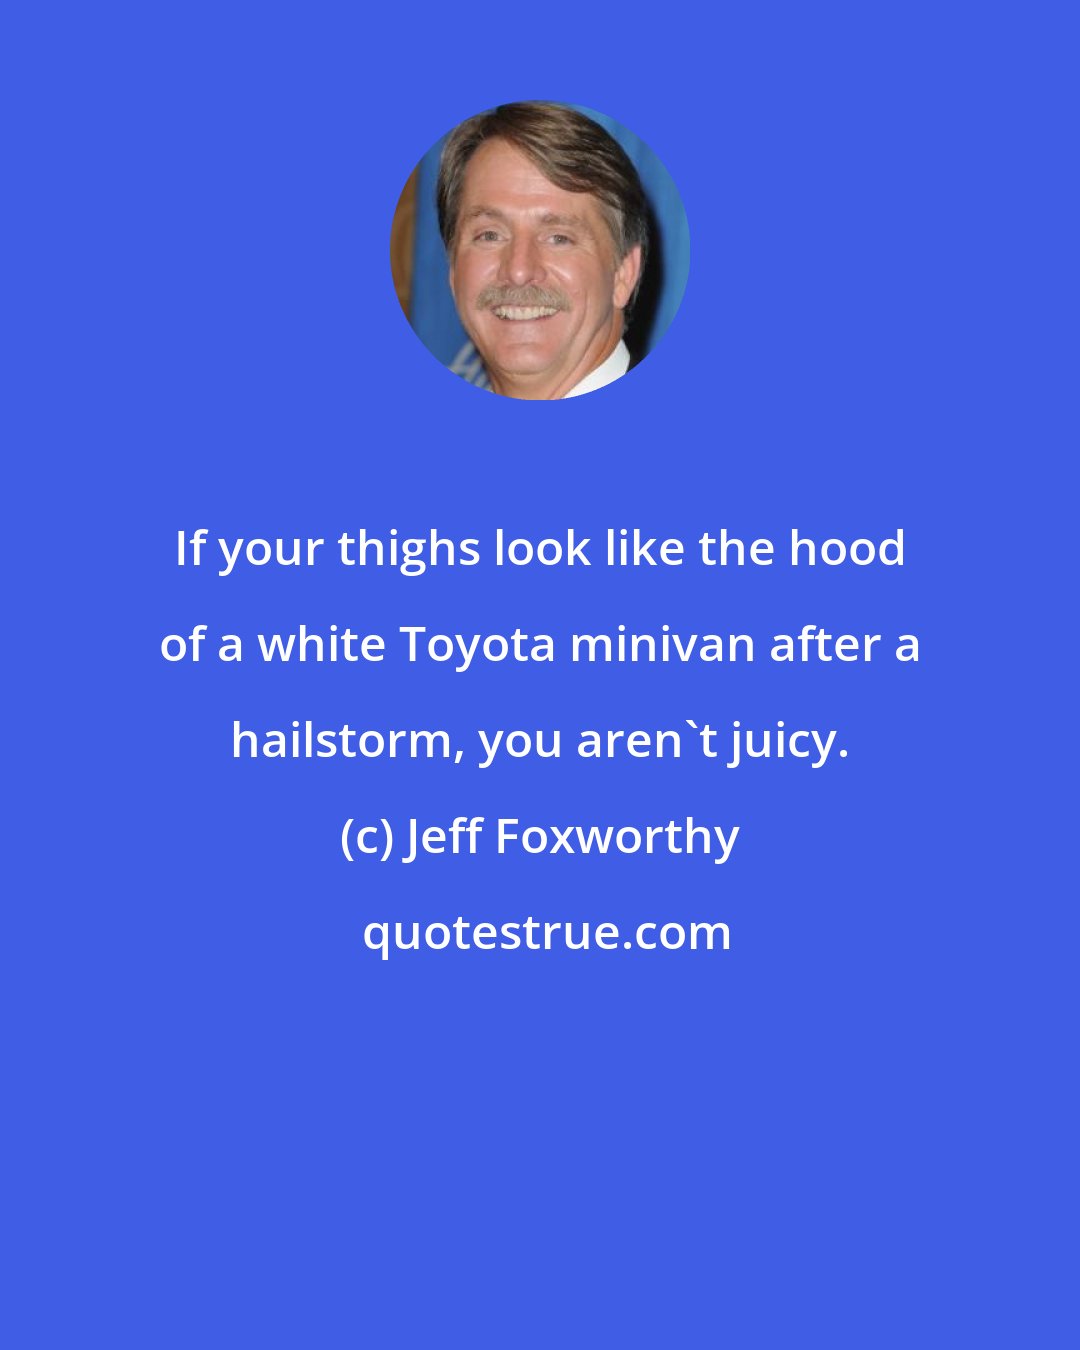 Jeff Foxworthy: If your thighs look like the hood of a white Toyota minivan after a hailstorm, you aren't juicy.